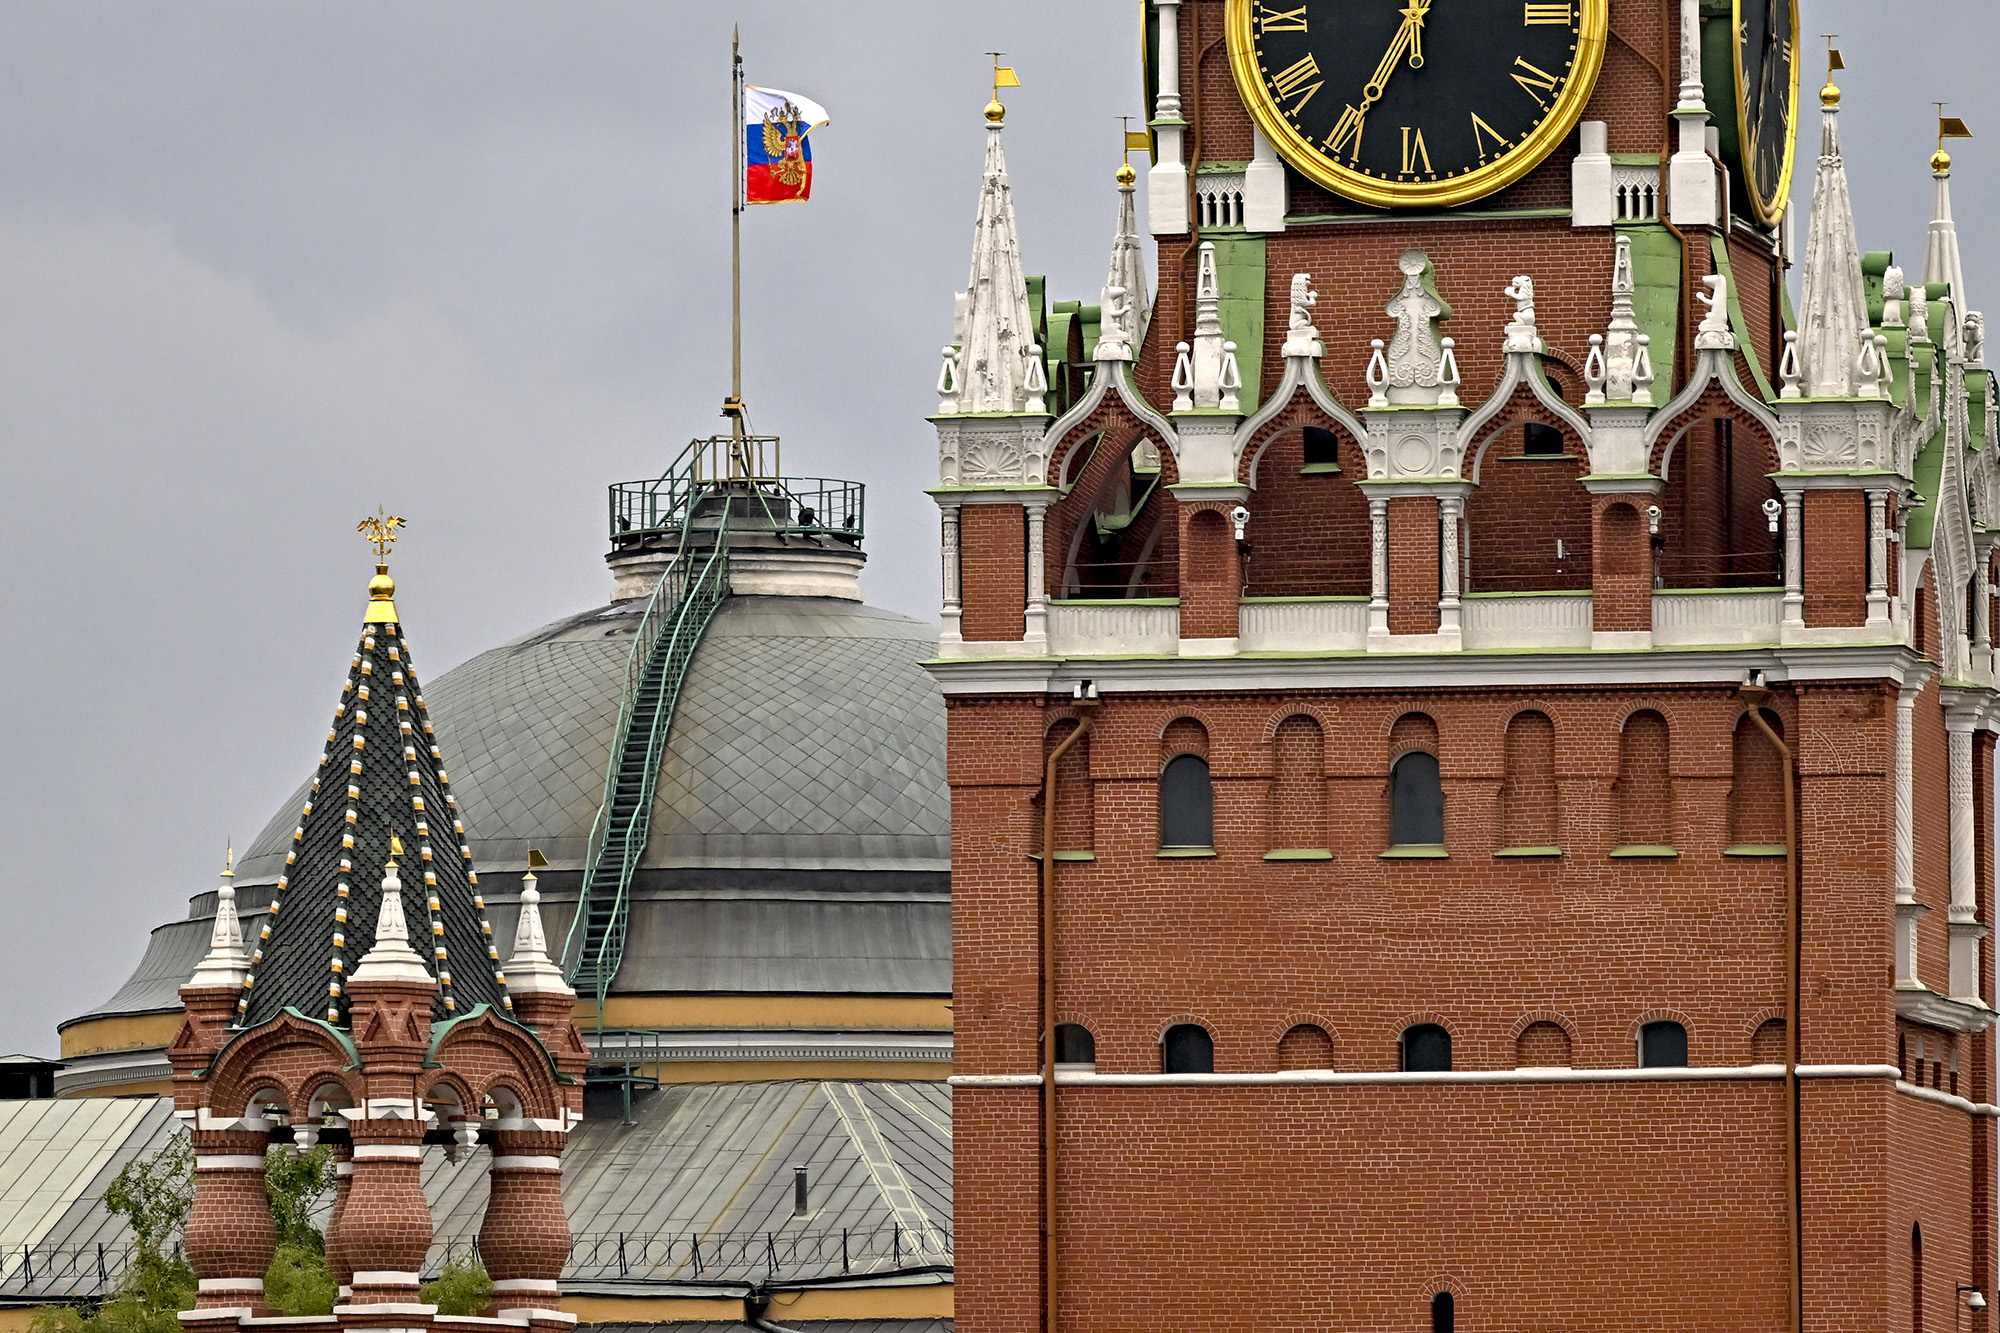 A view of the Kremlin, with damage visible on the dome section, after the drone attack in Moscow, Russia on May 3.